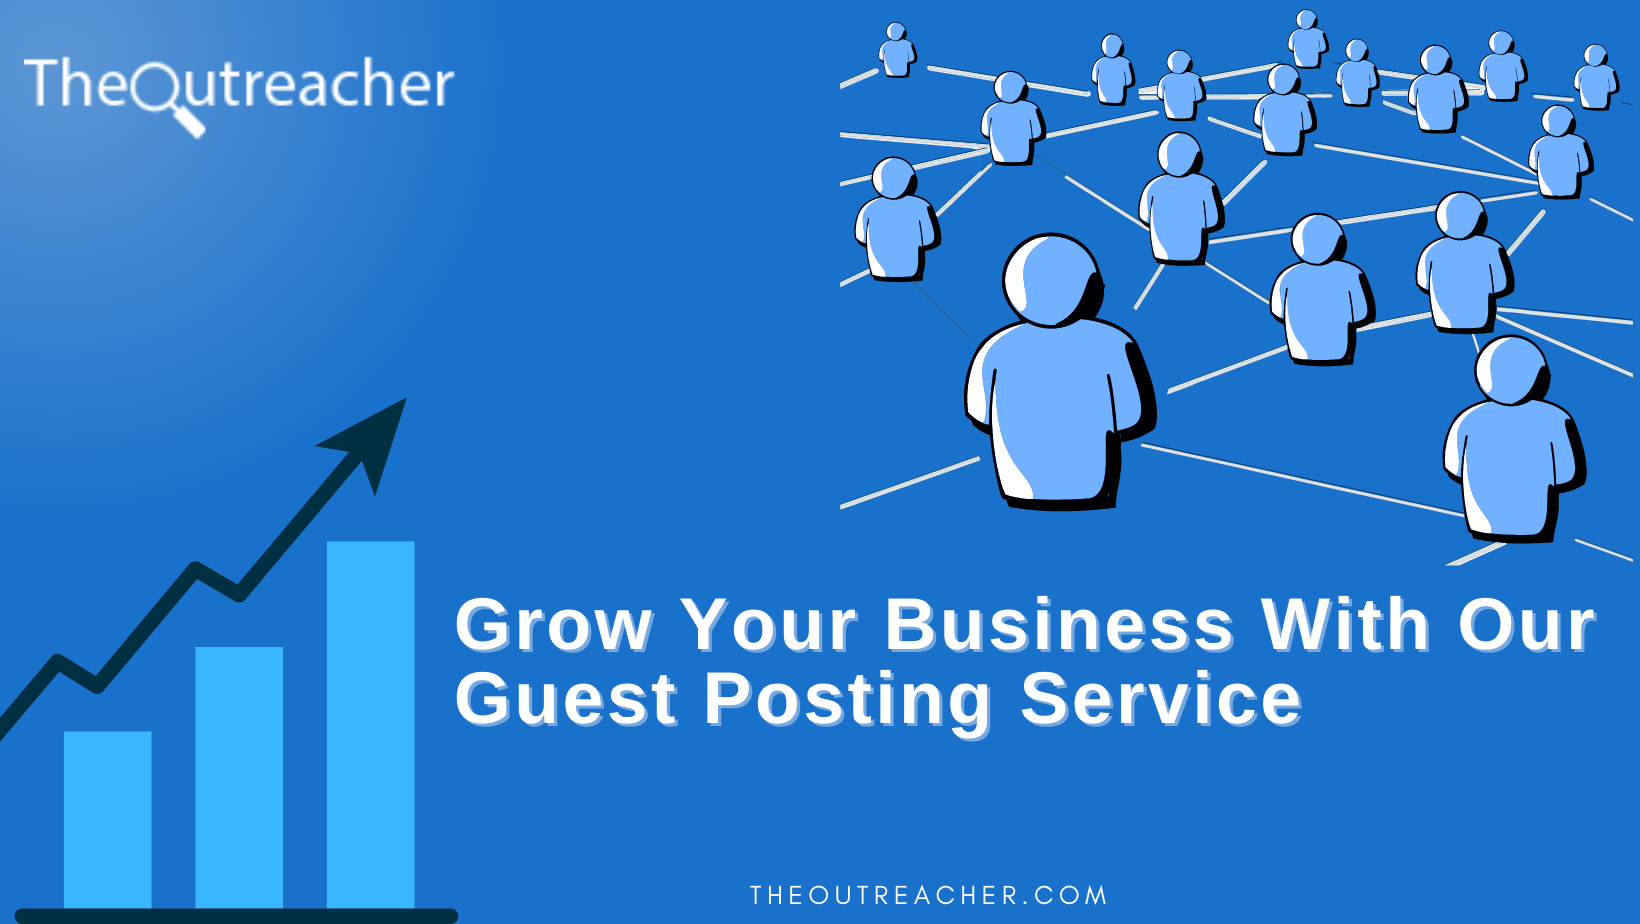 What are guest post services?